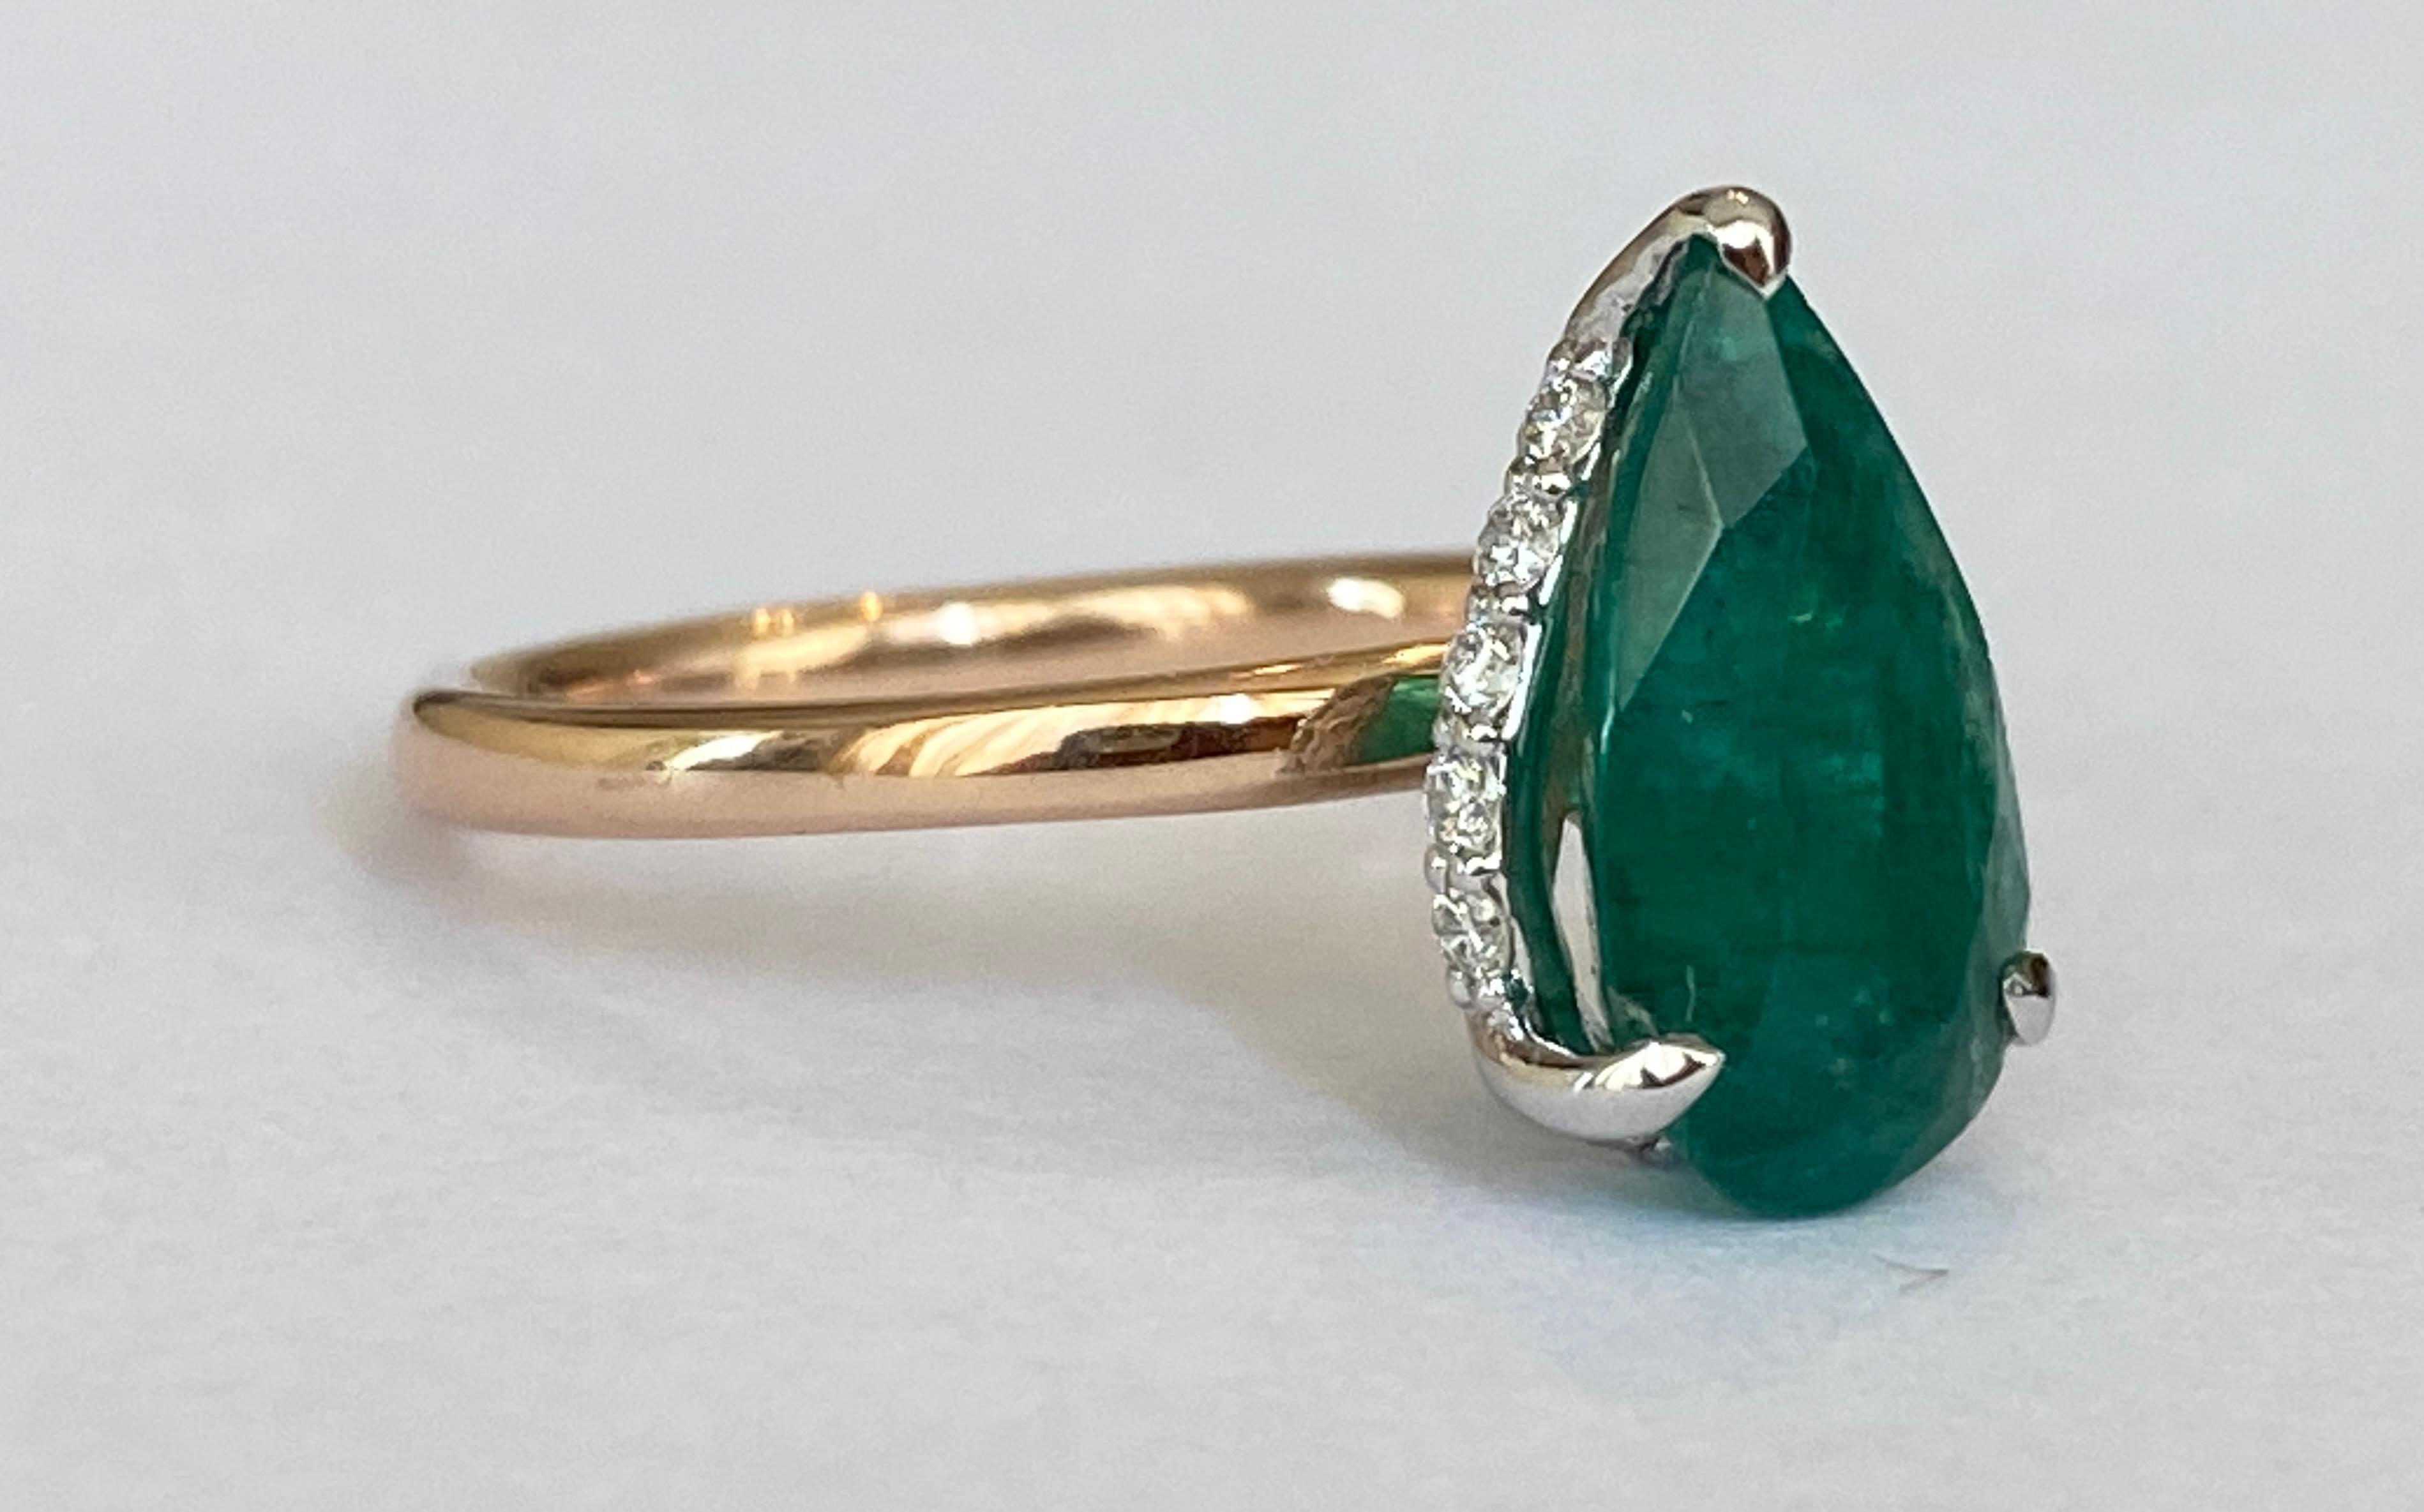 Offered in new condition, an 18 carat handmade Bi-color ring with a natural pear mixed cut emerald of 3.00 crt in the center, surrounded by 13 pieces of brilliant cut diamonds totaling approximately 0.16 crt of quality F/G/VS. The color of the